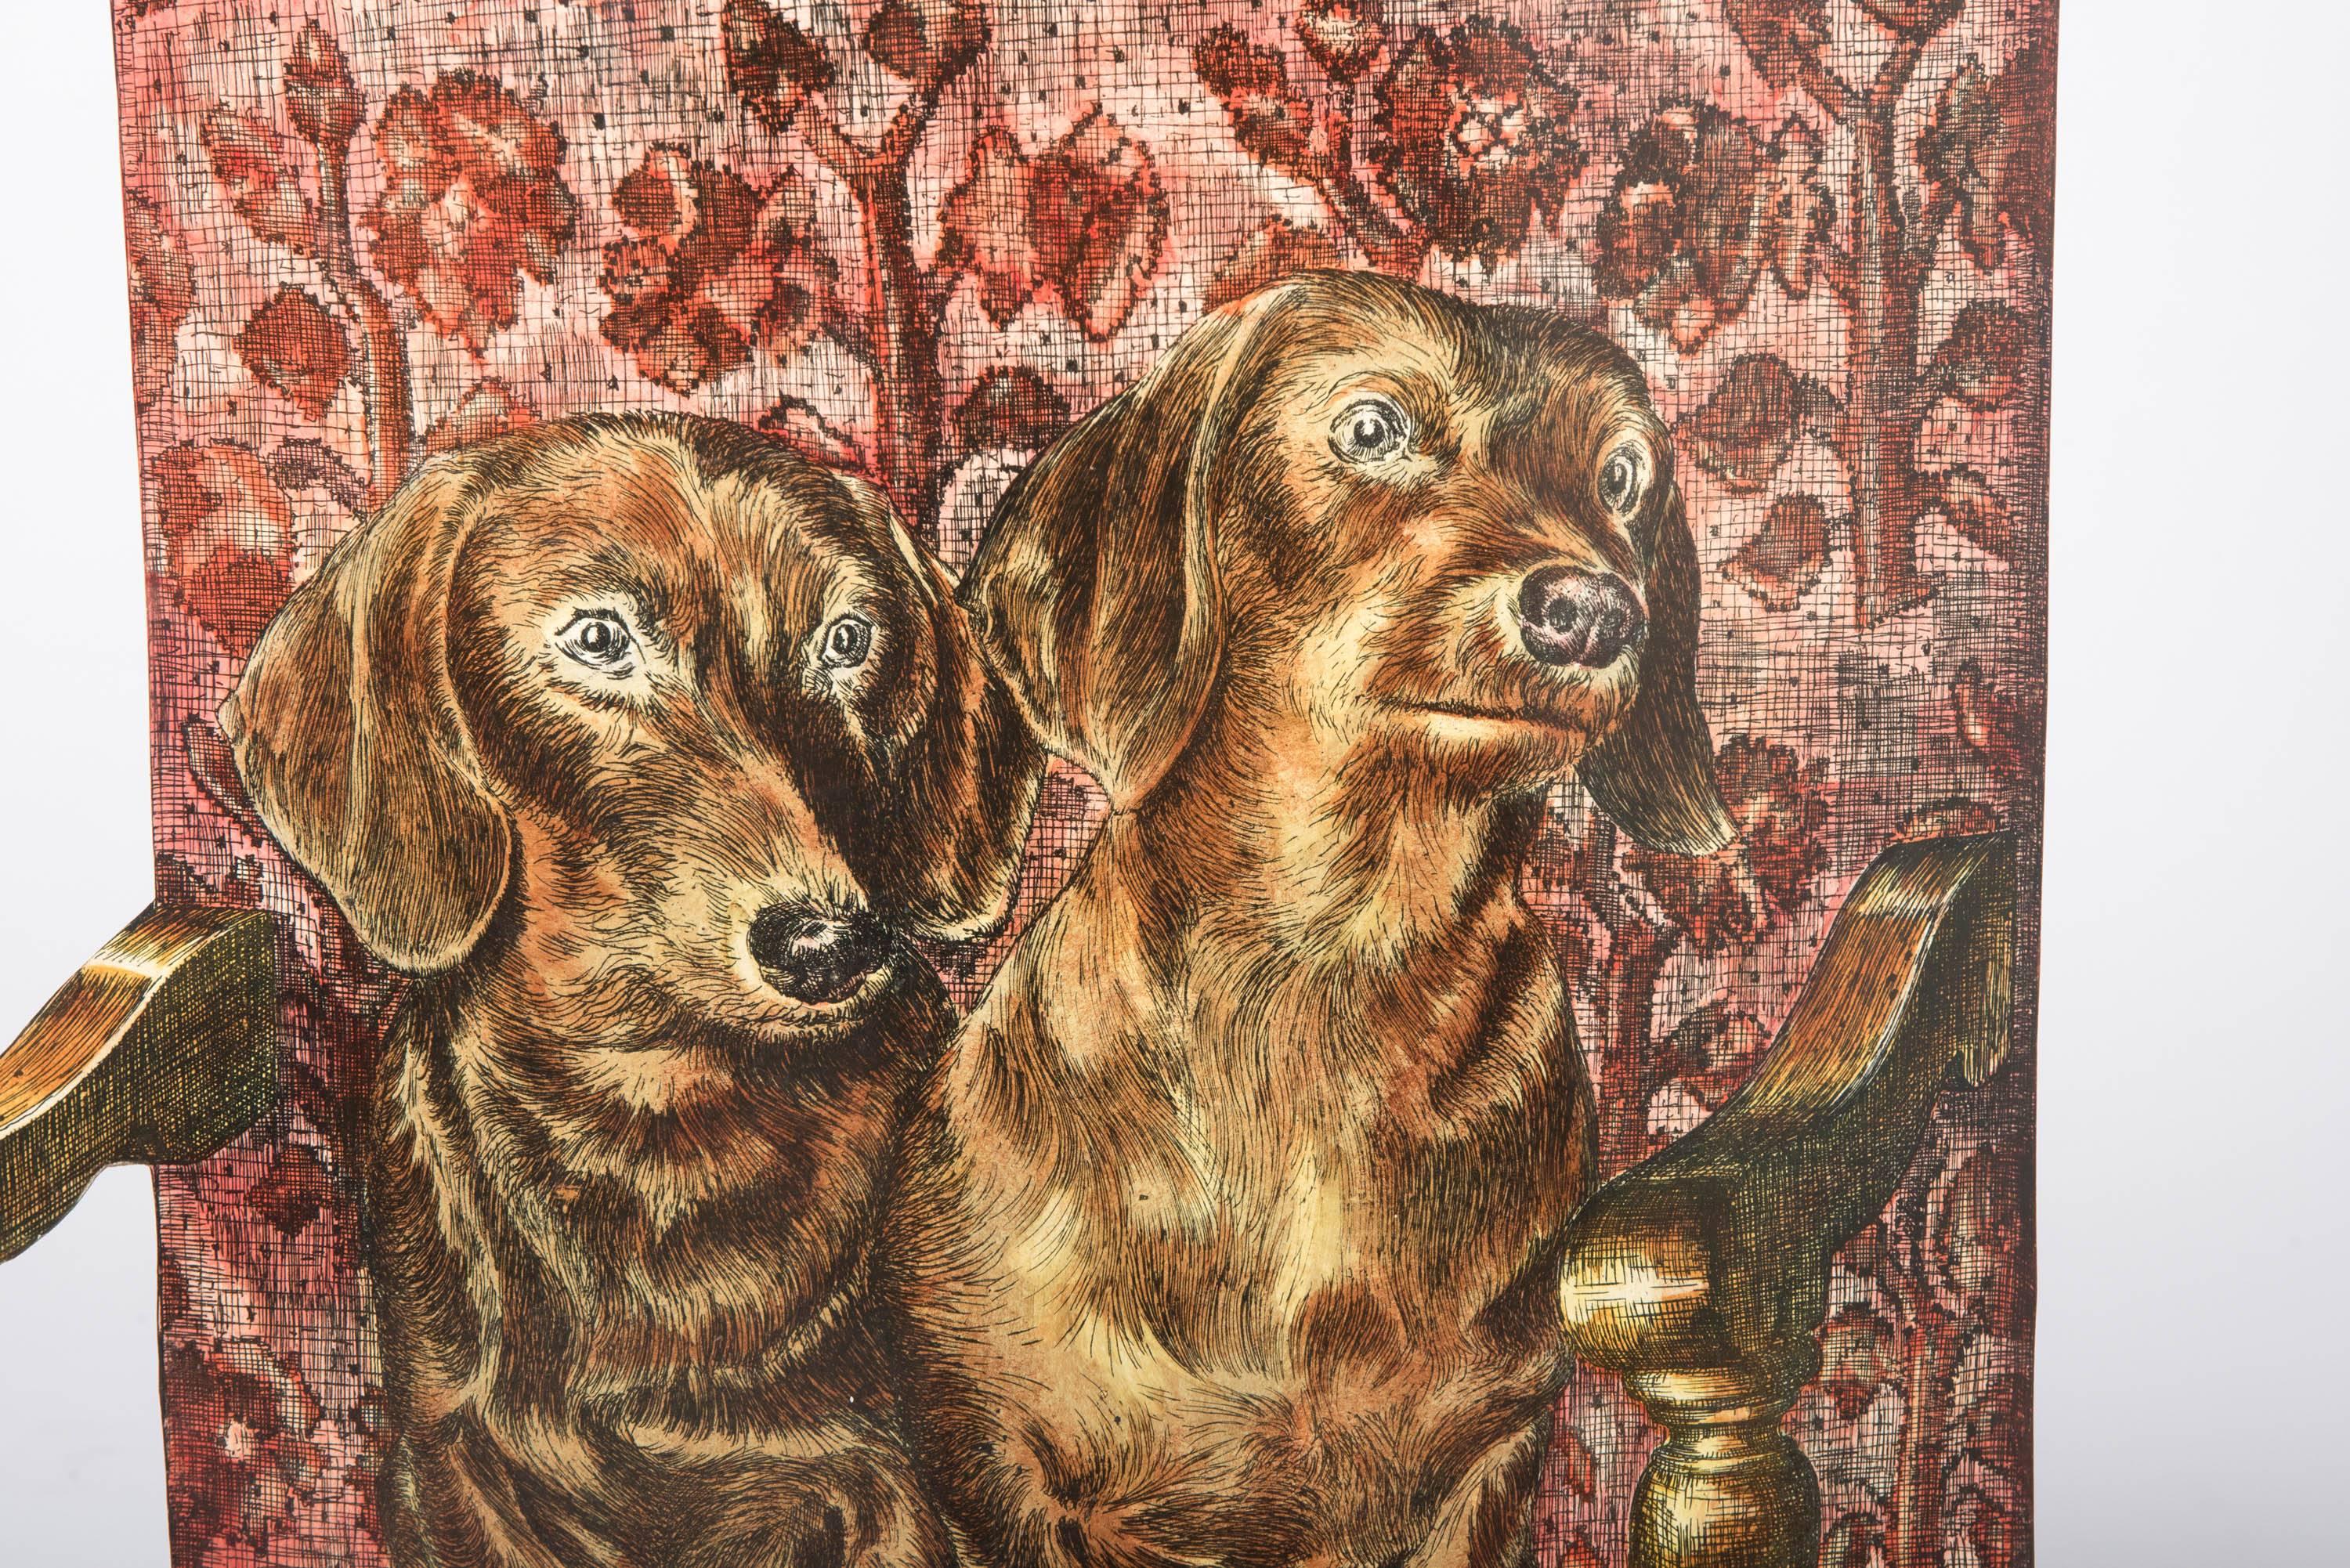 An umbrella stand by Piero Fornasetti.
“Bassotti” two Dachshunds sat on a chair.
Metal.
Lithographically printed and hand coloured.
Italy, circa 1960
Measures: 63 cm high x 50 cm wide x 17 cm deep.